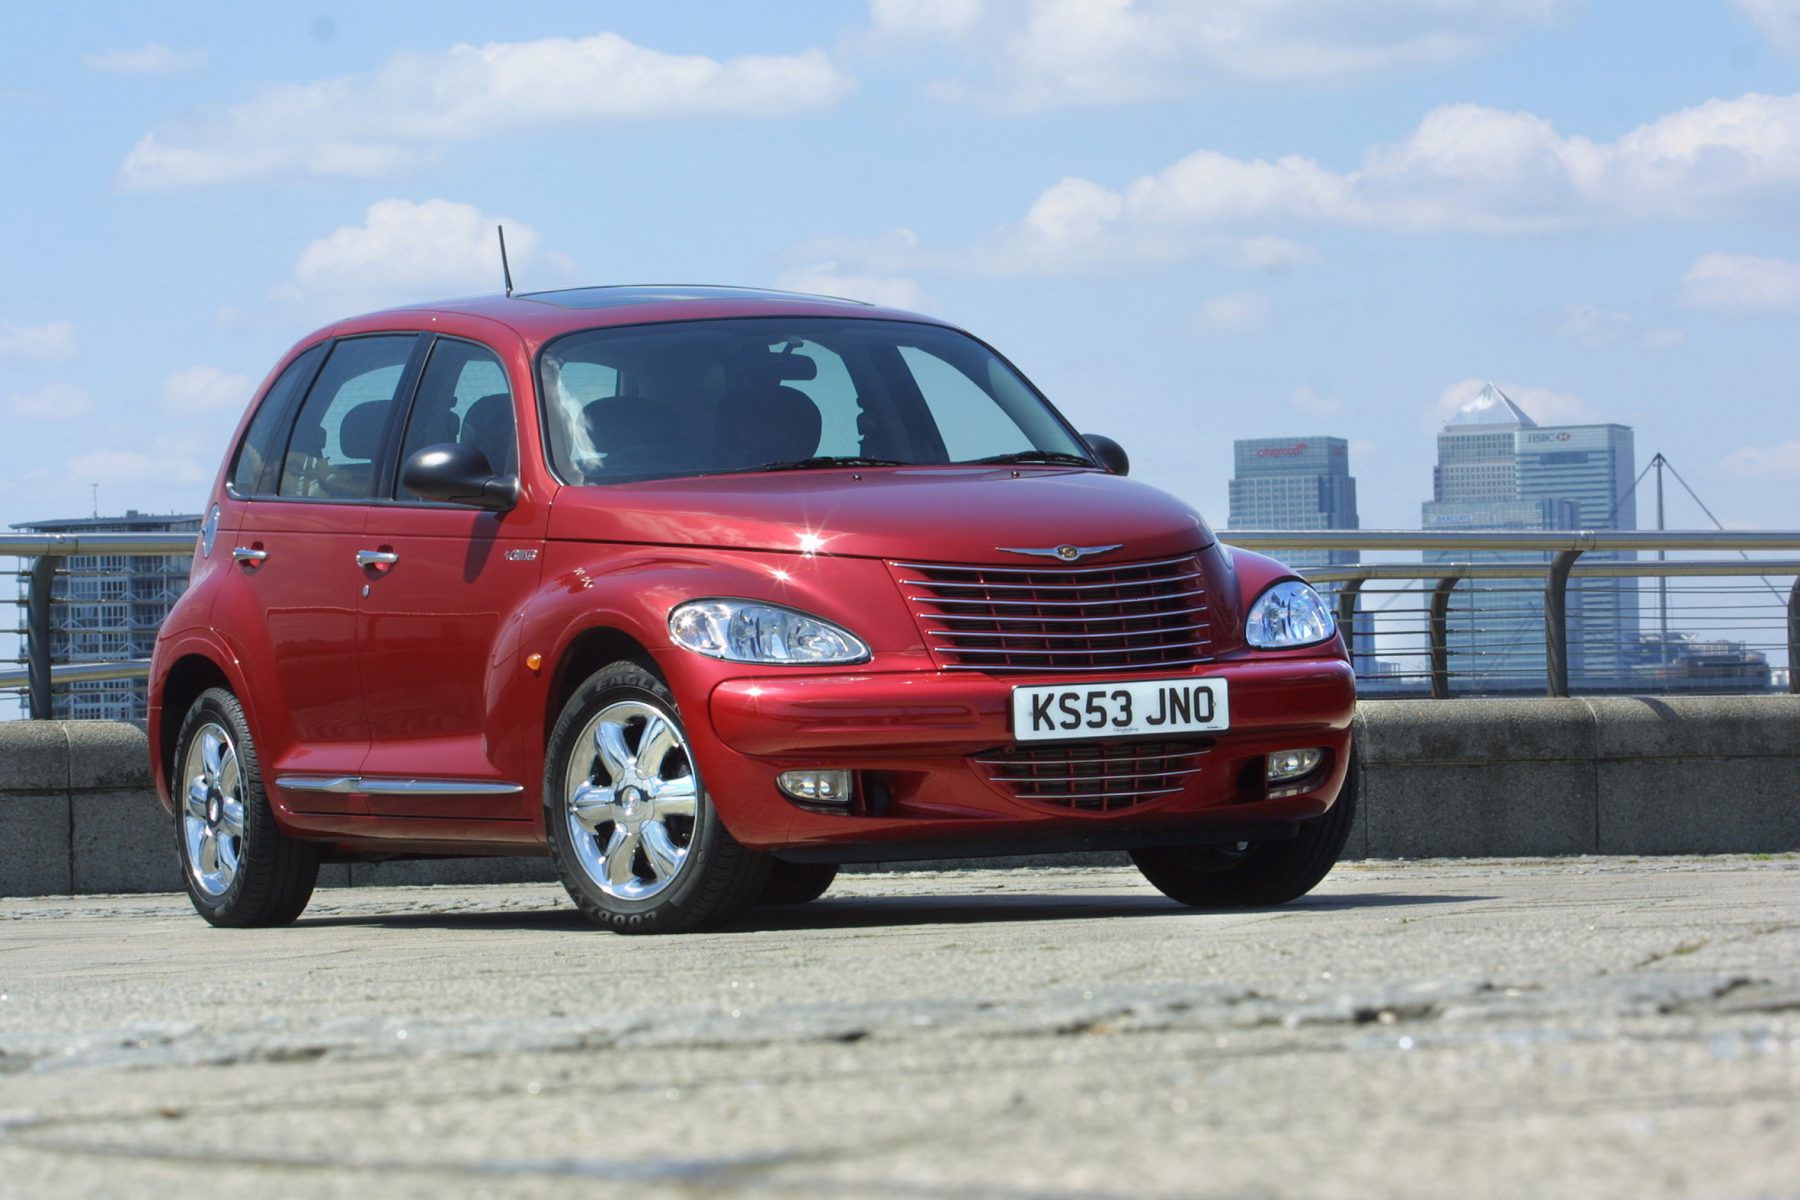 Front view of a red Chrysler PT Cruiser parked in a car park